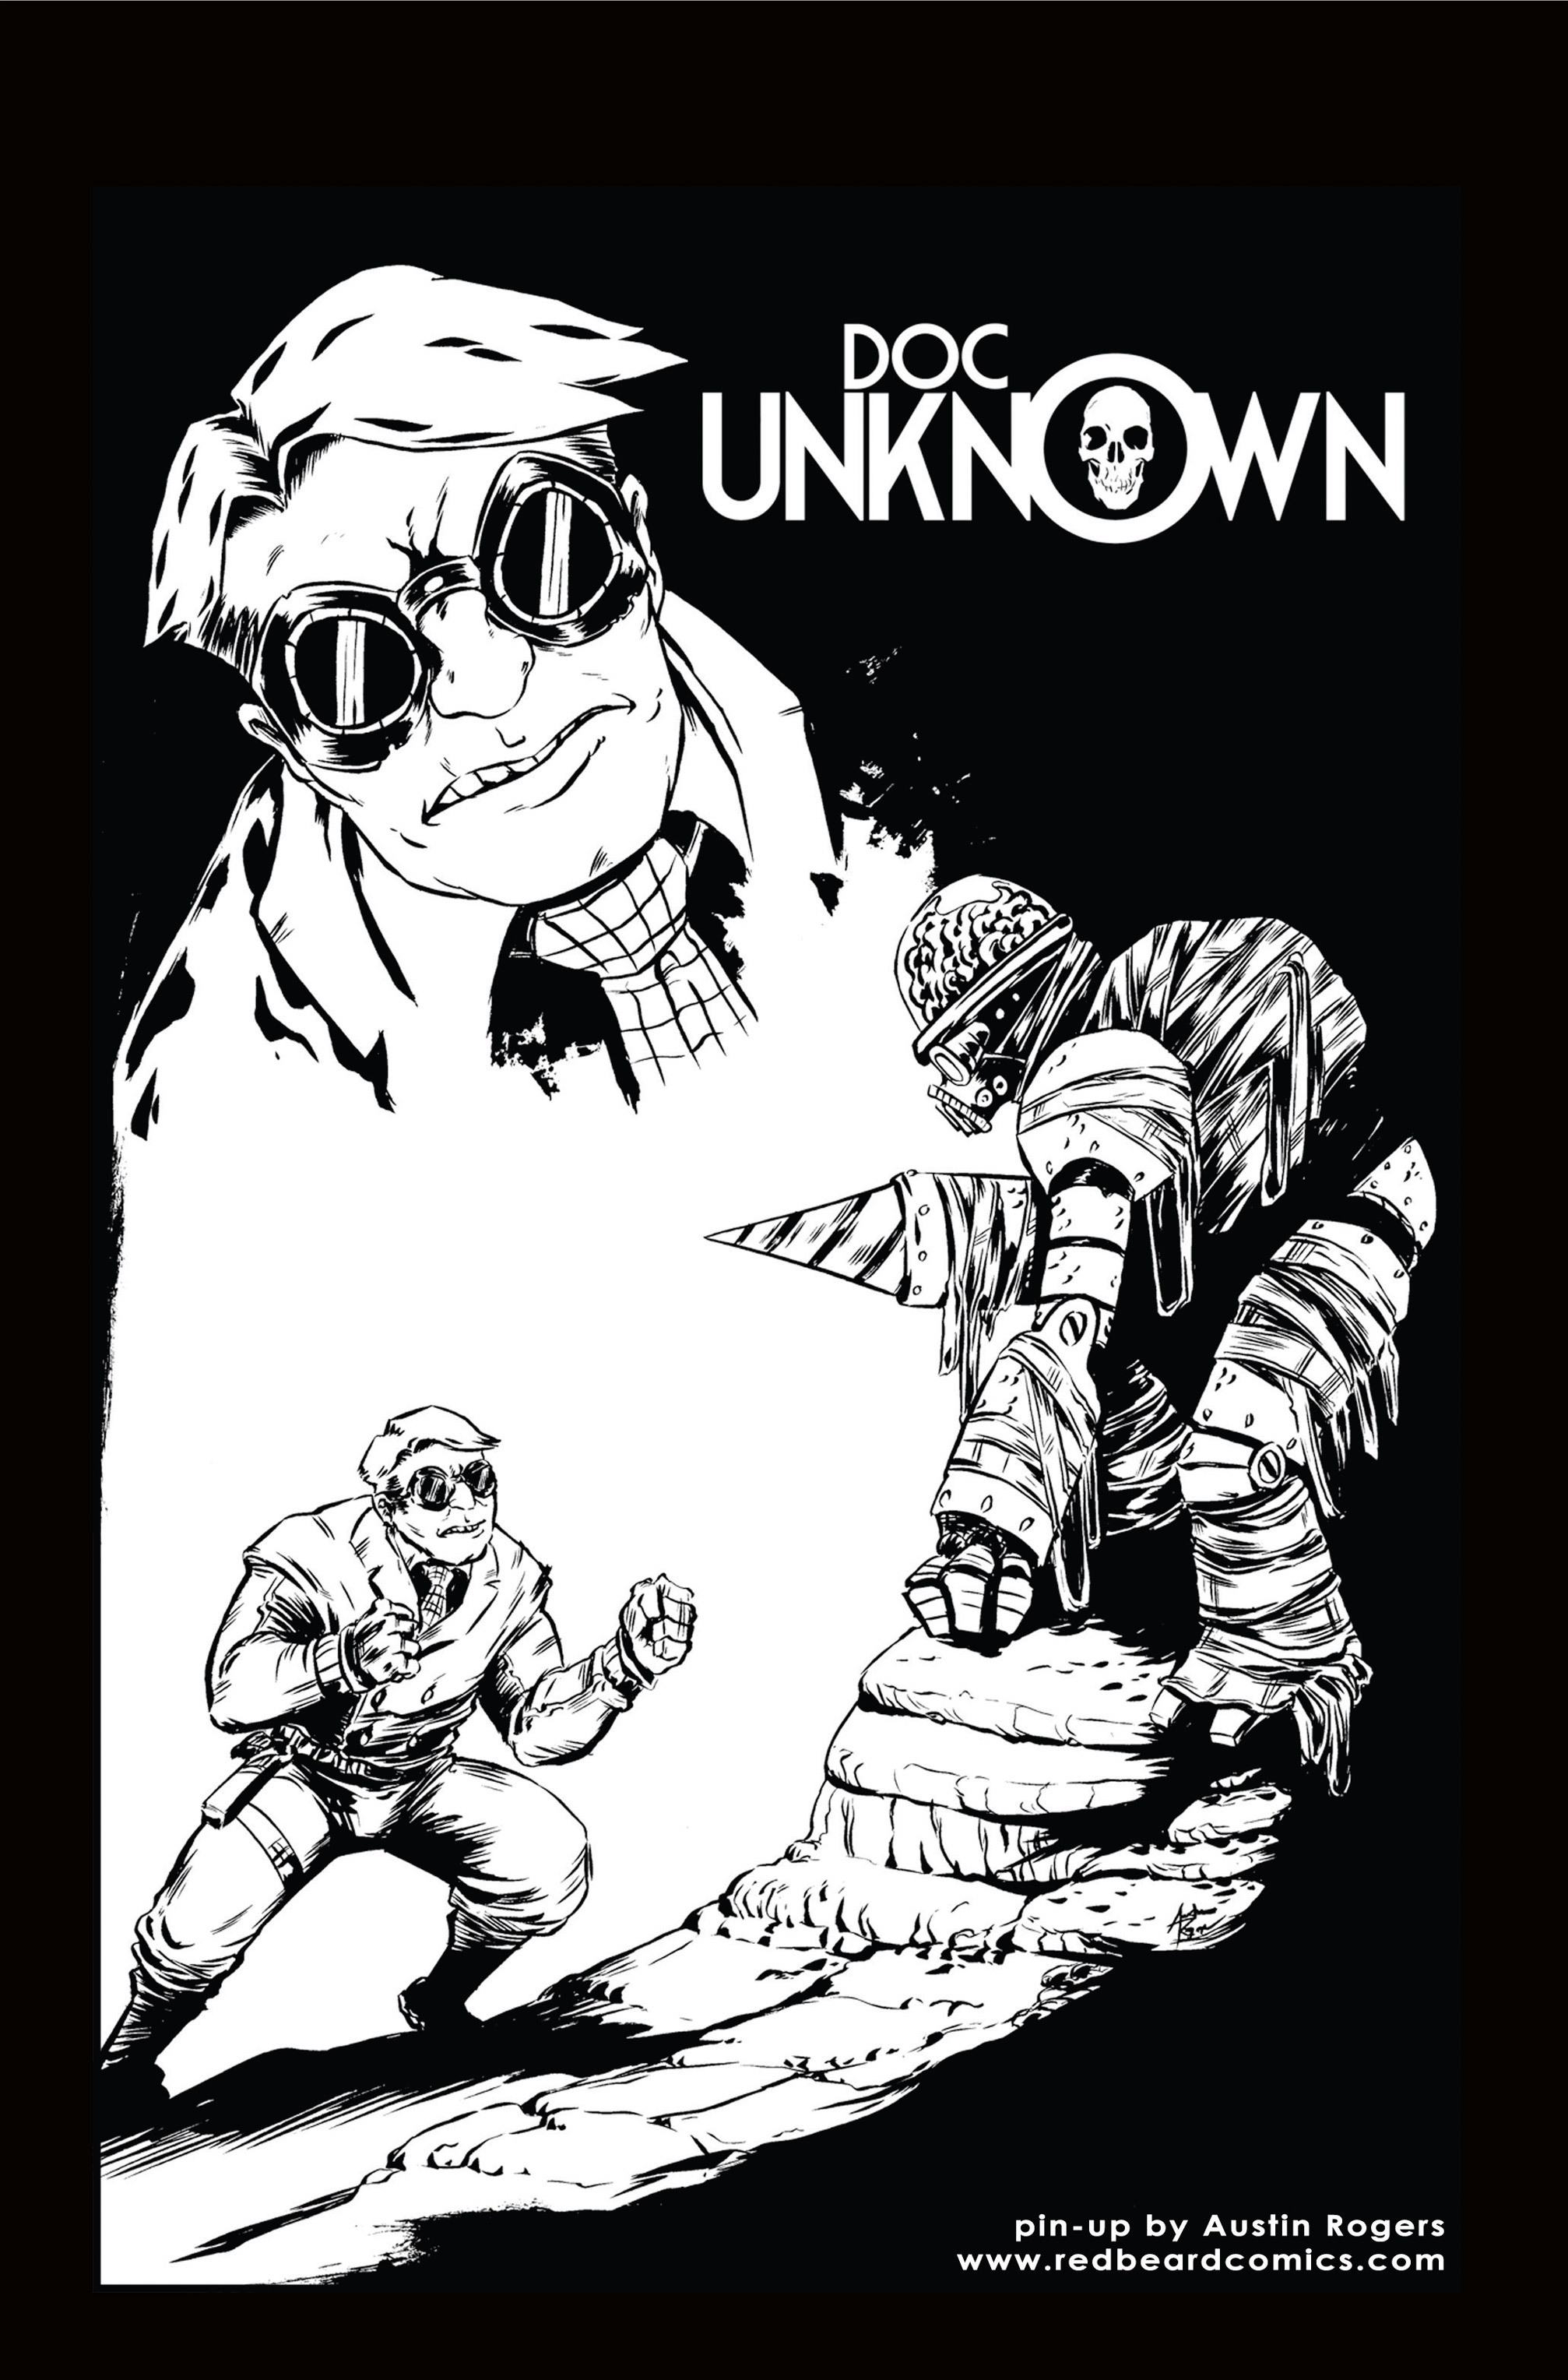 Read online Doc Unknown comic -  Issue #2 - 27